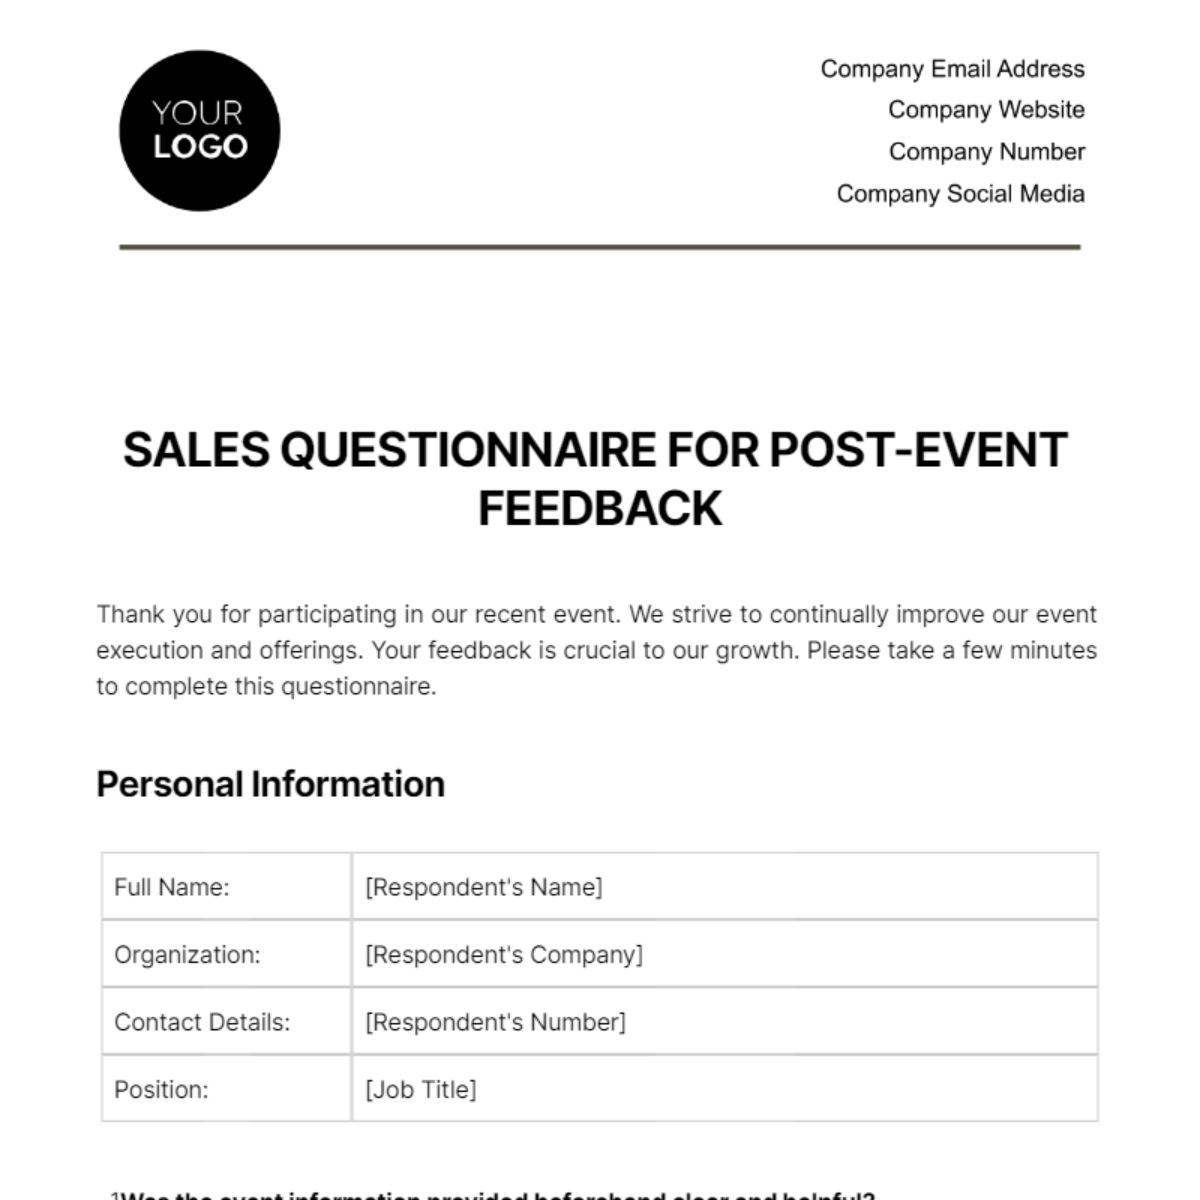 Sales Questionnaire for Post-Event Feedback Template